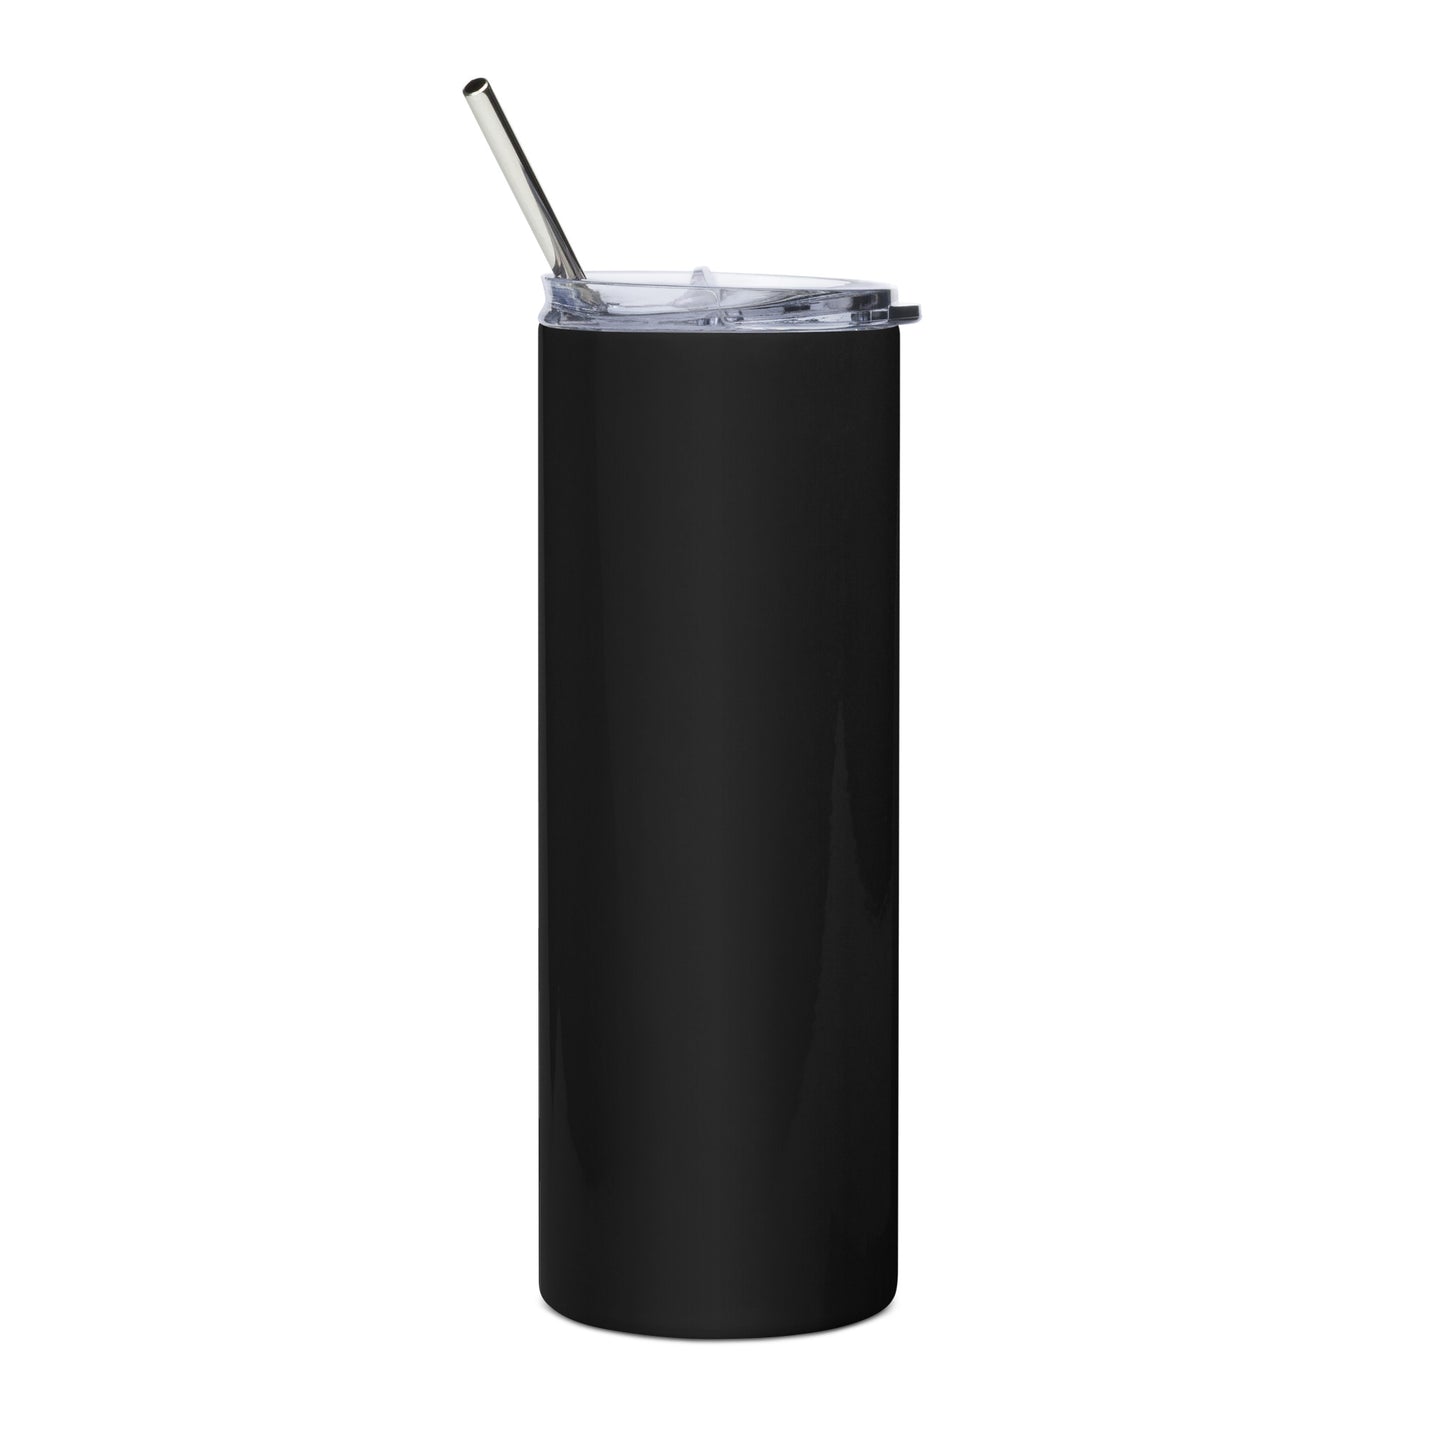 Only Talking to my Horse Today - Black - Stainless steel tumbler